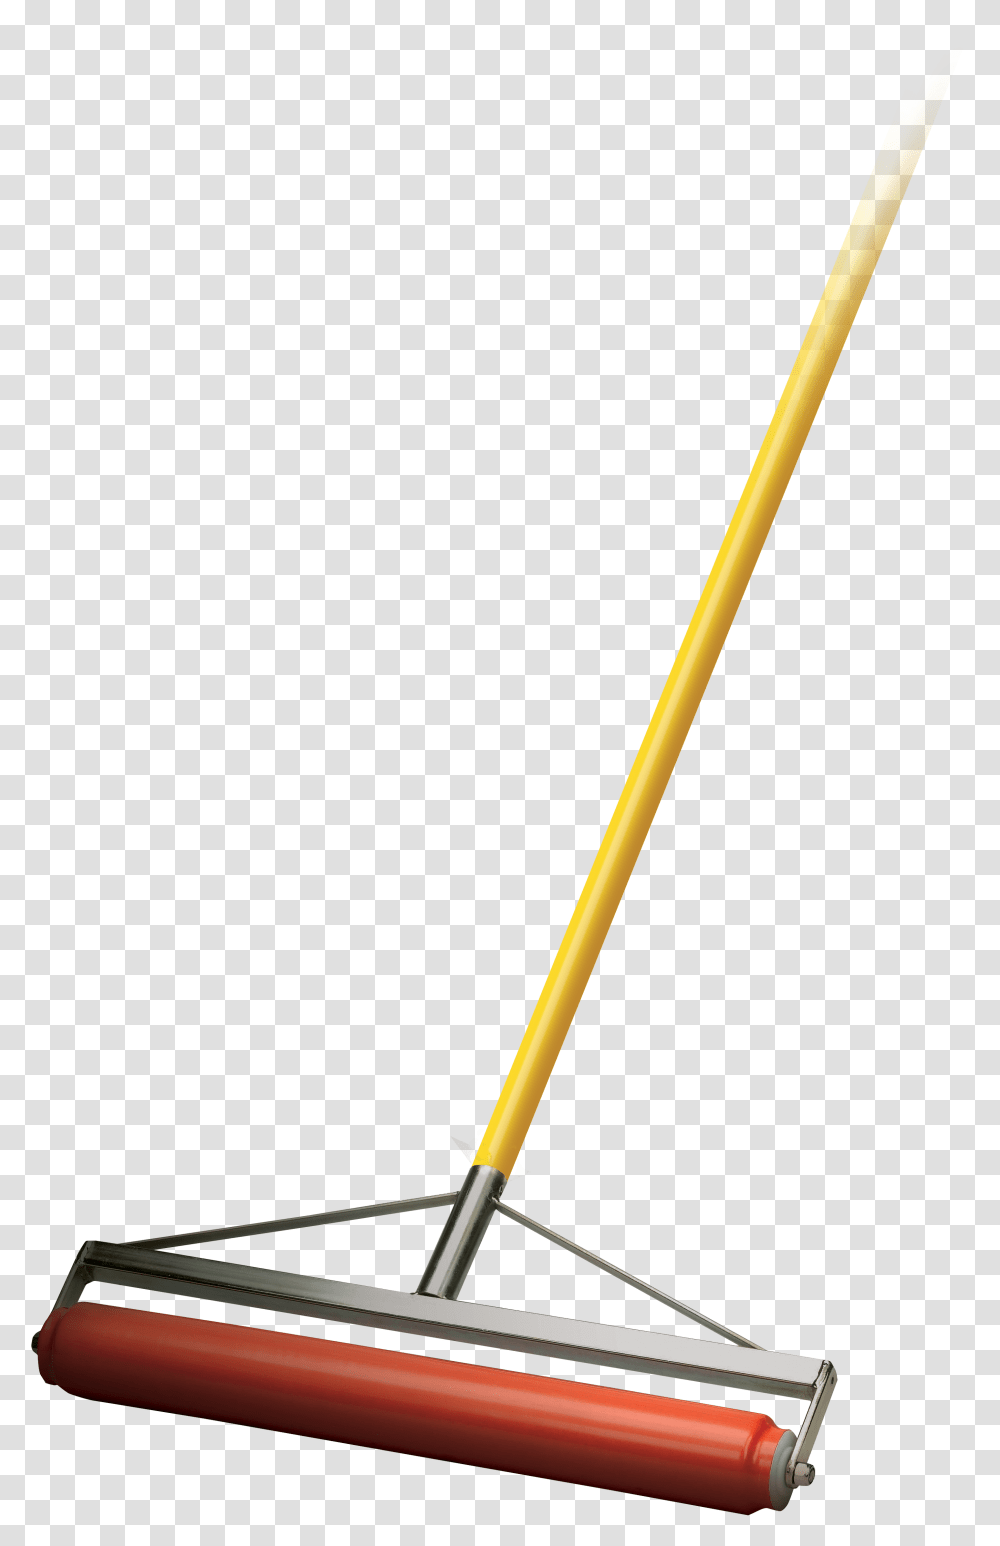 Boat, Broom, Rake, Weapon, Weaponry Transparent Png